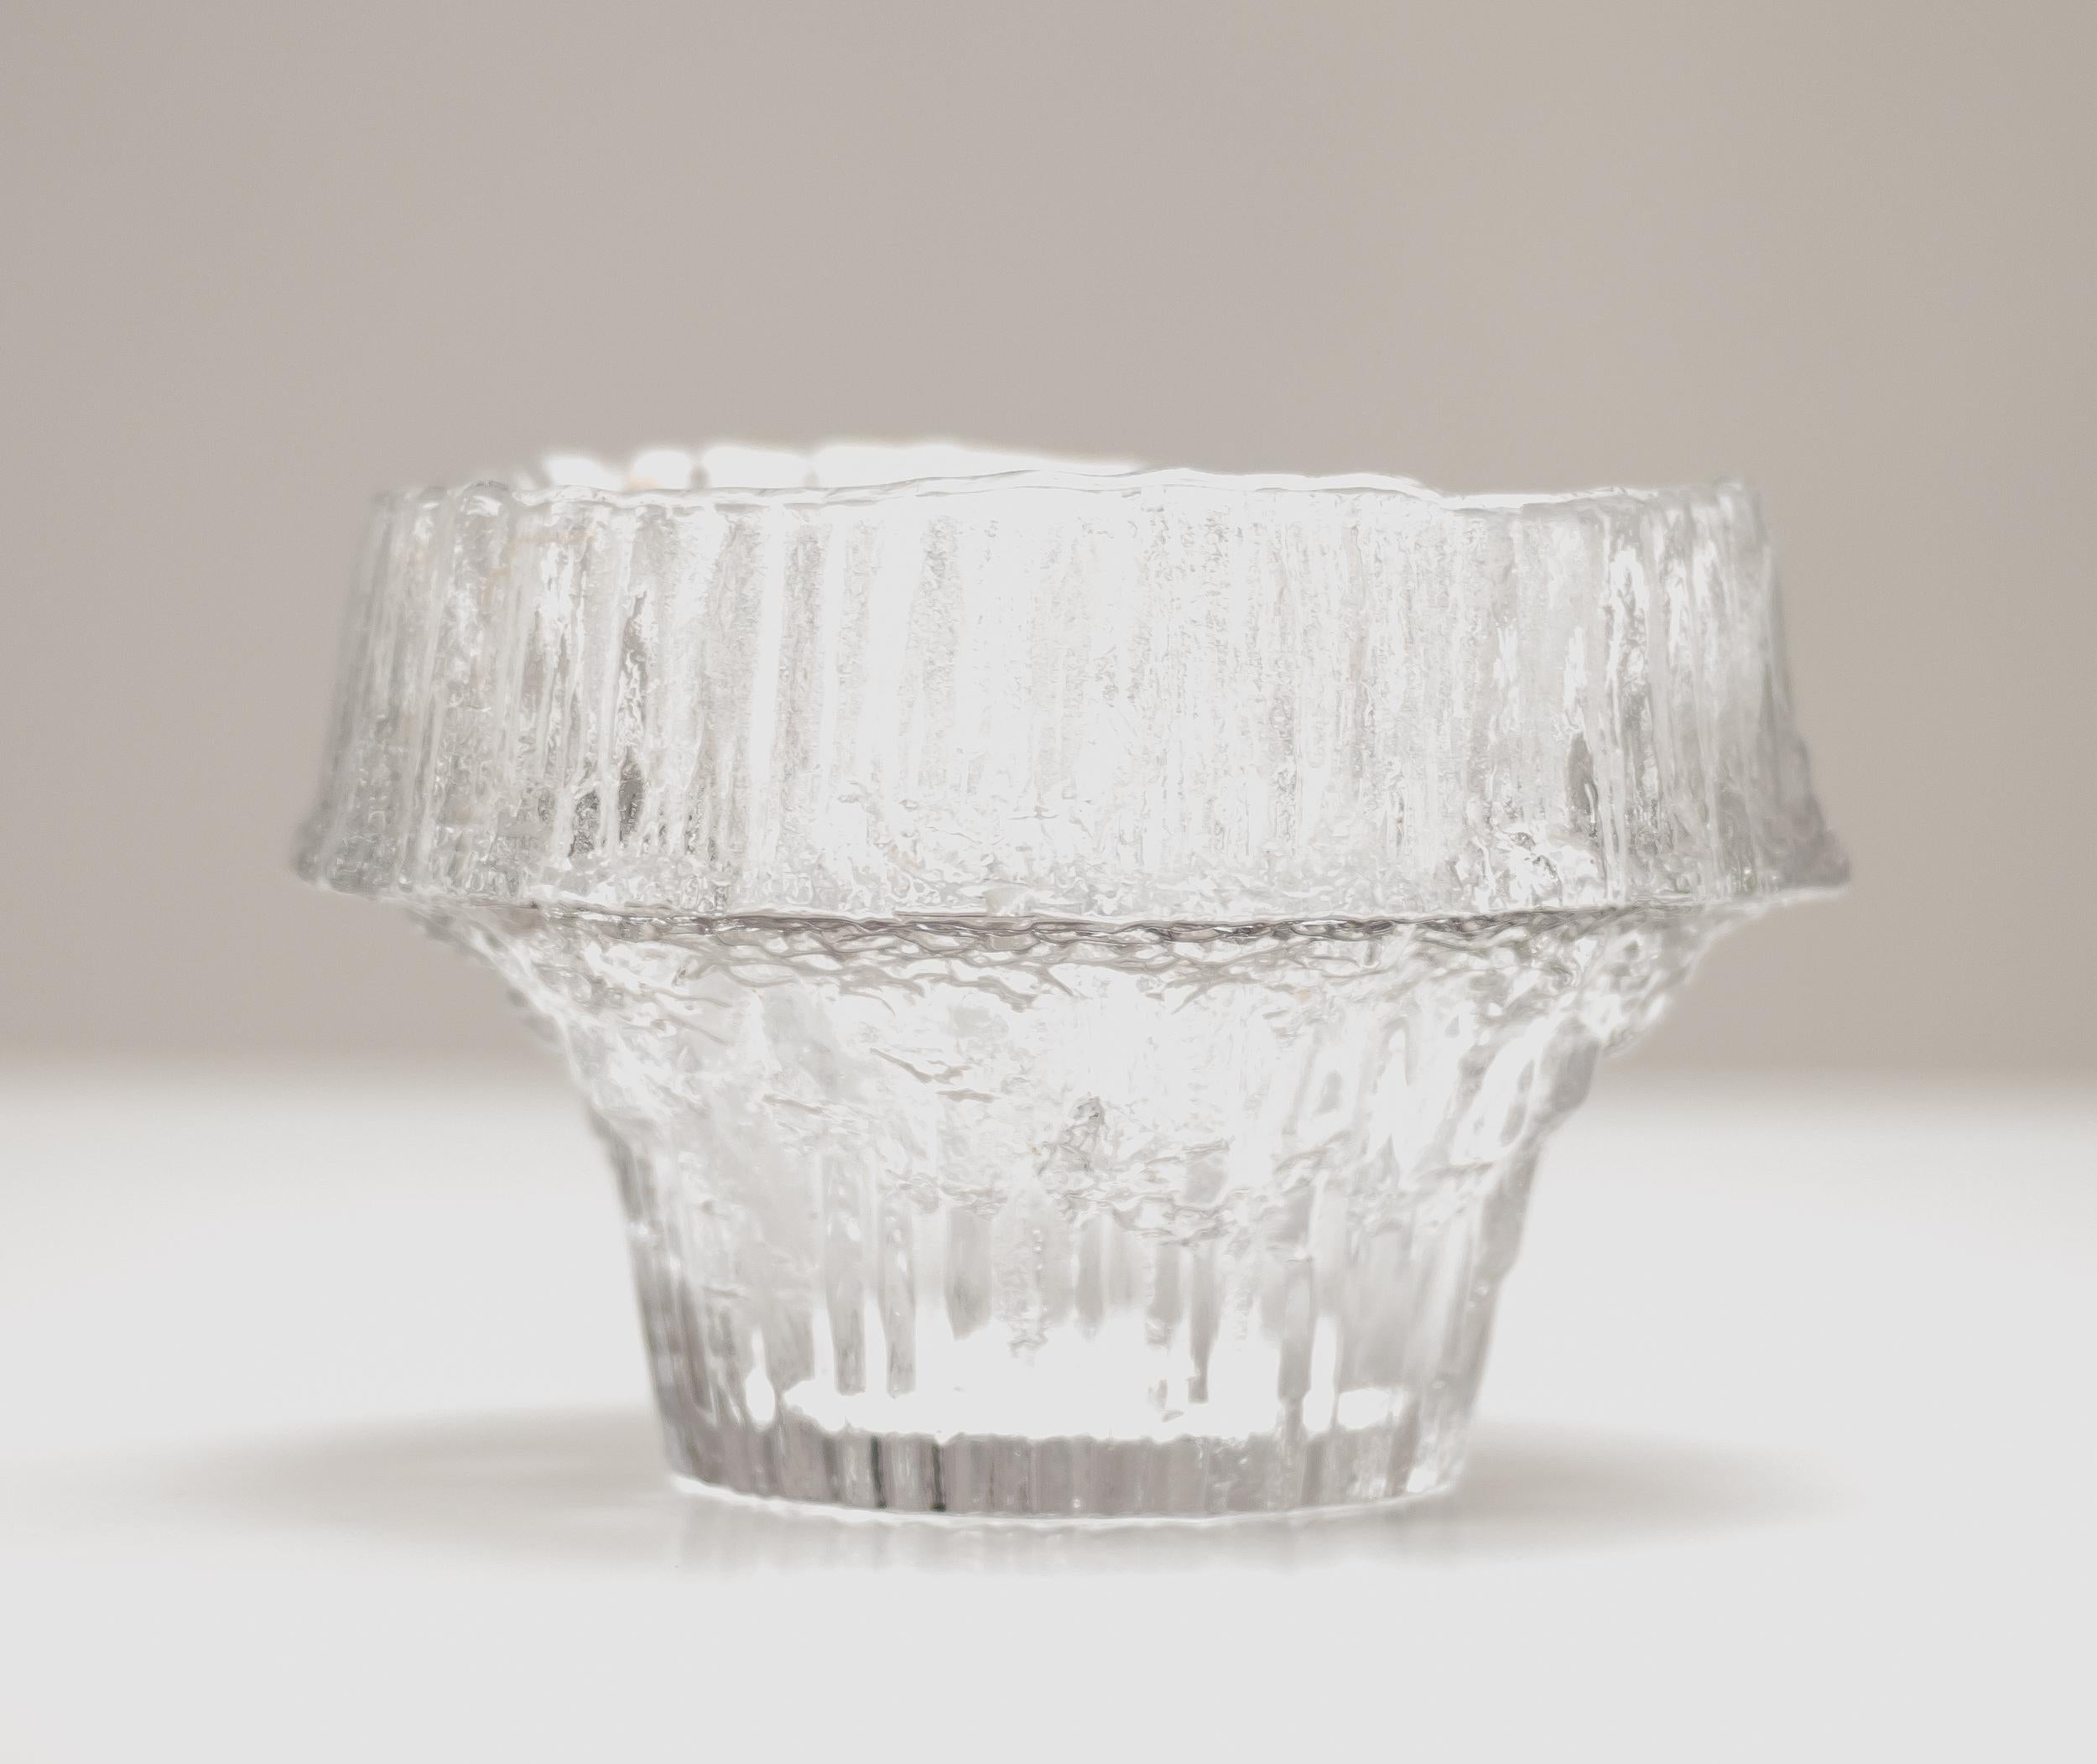 Large Tapio Wirkkala Stellaria bowl #3450 by Iittala in mould-blown clear glass.
Engraved: Tapio Wirkkala 3450.
Marked with a remnant of an Iittala sticker.

Tapio Wirkkala (1915-1985) was a multitalented design genius, widely considered a leading